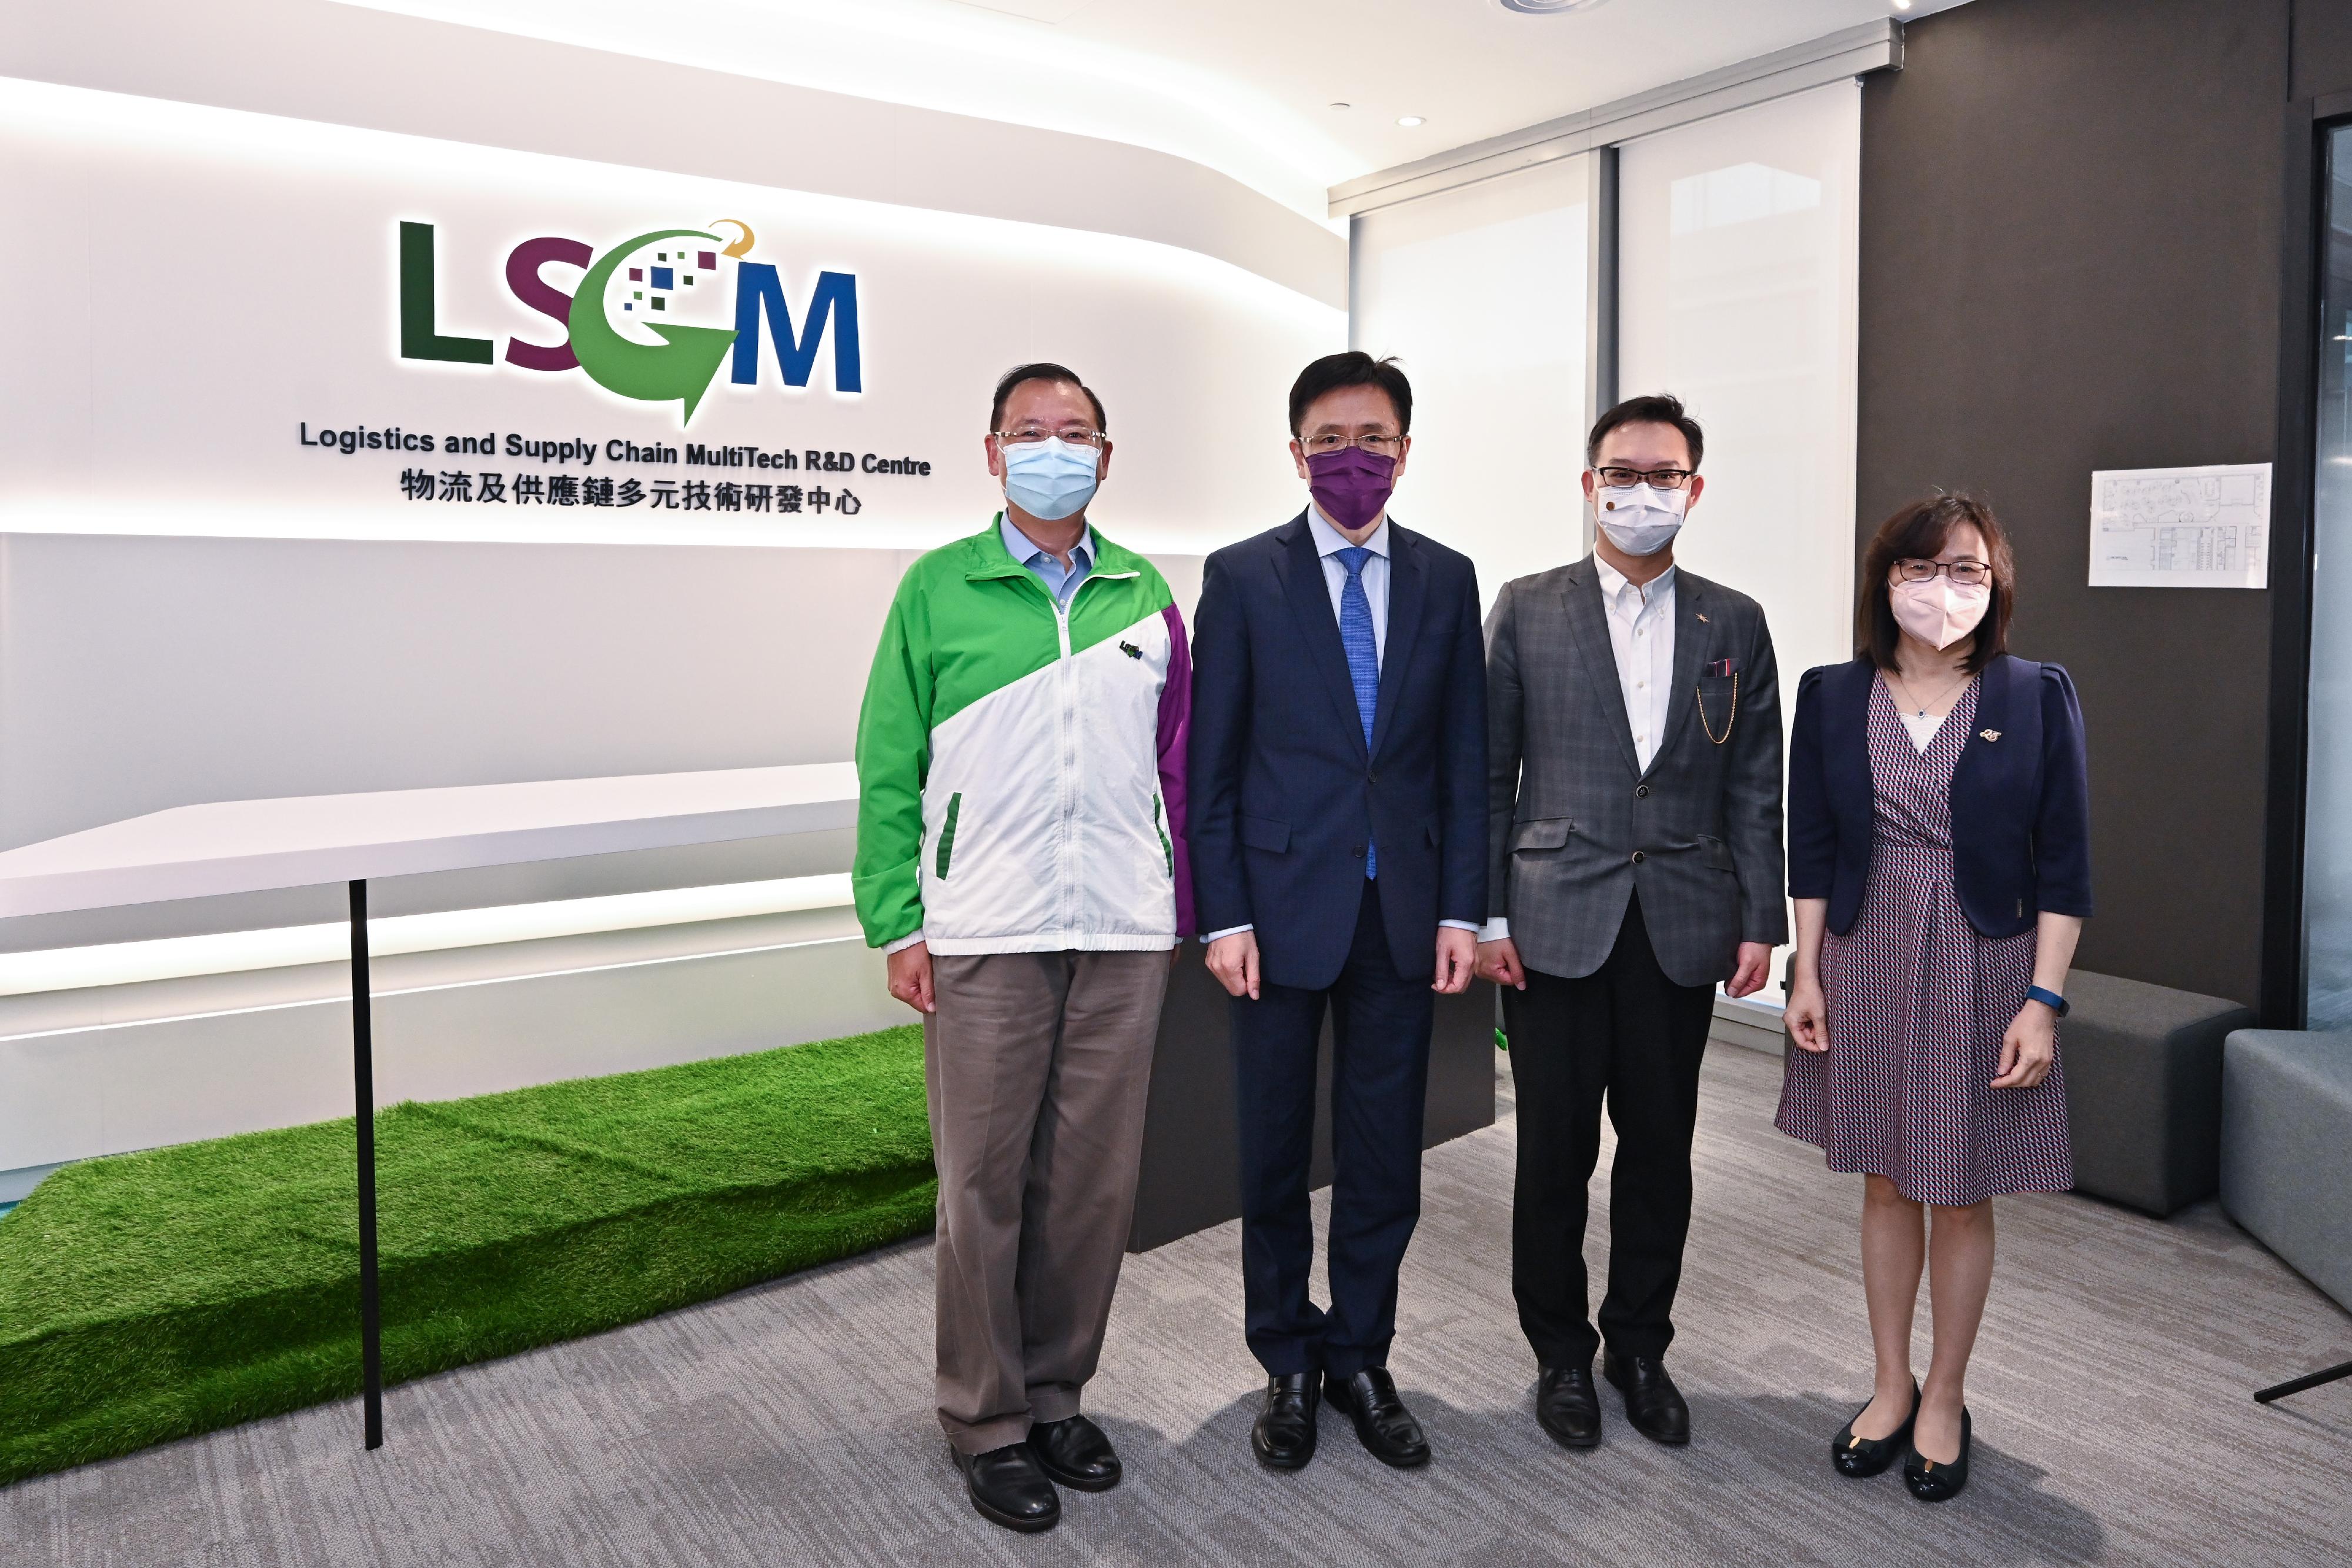 Accompanied by the Commissioner for Innovation and Technology, Ms Rebecca Pun (first right), the Secretary for Innovation, Technology and Industry, Professor Sun Dong (second left), visits the Logistics and Supply Chain MultiTech R&D Centre (LSCM) today (July 19) and is pictured with the Chairman of the LSCM, Dr Alan Lam (second right), and the Chief Executive Officer of the LSCM, Mr Simon Wong (first left).